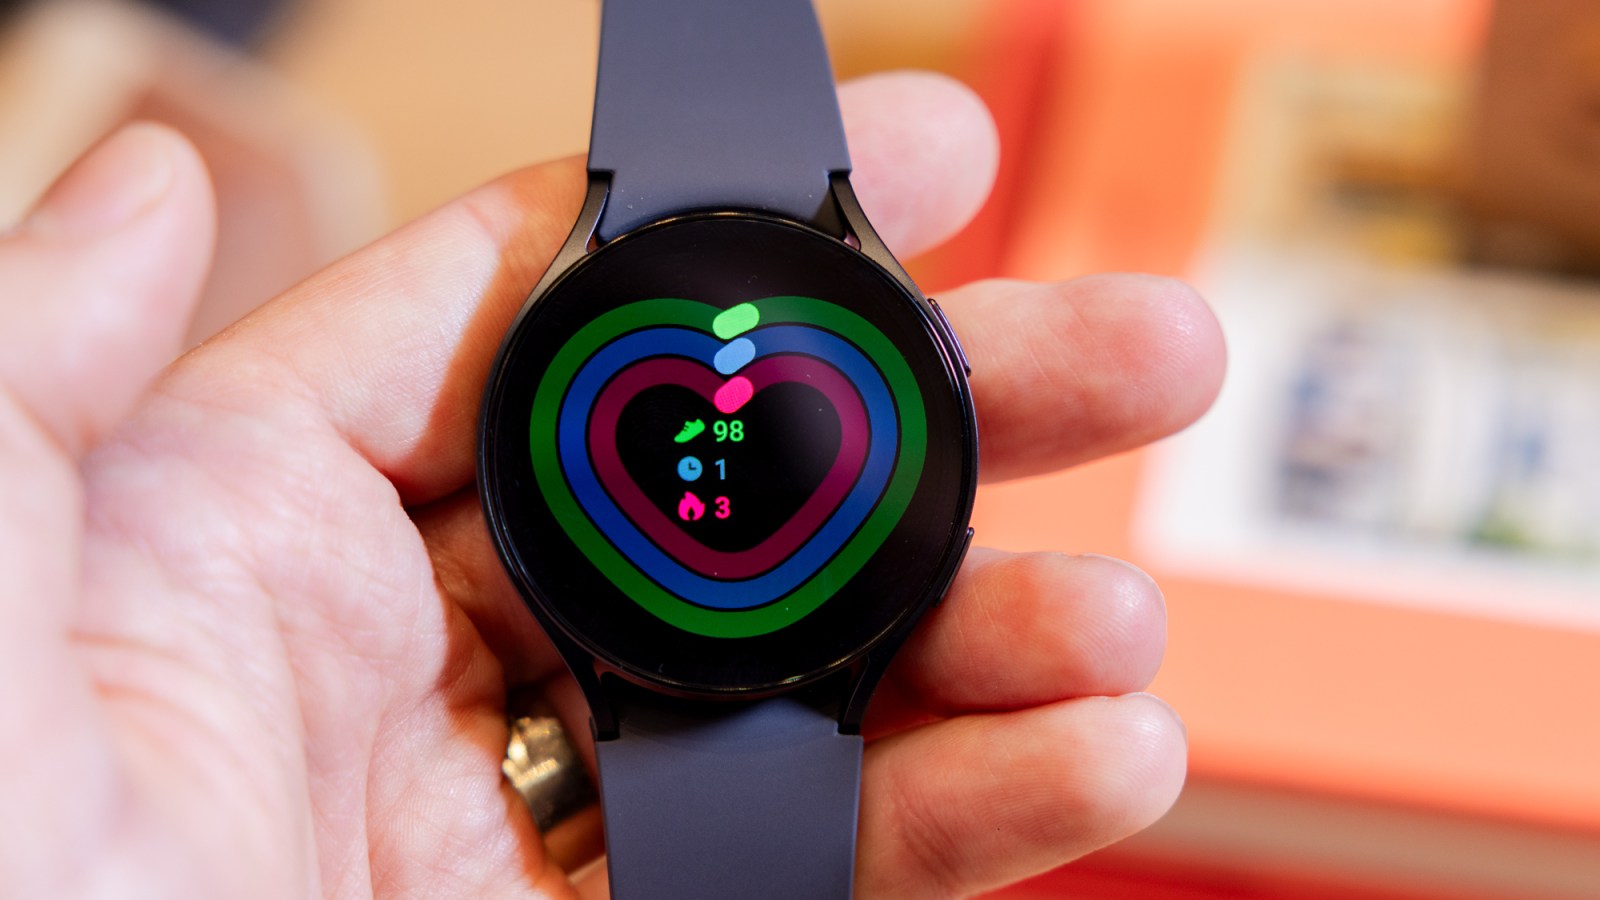 Samsung could launch a cheap Galaxy Watch, but is it an FE model?